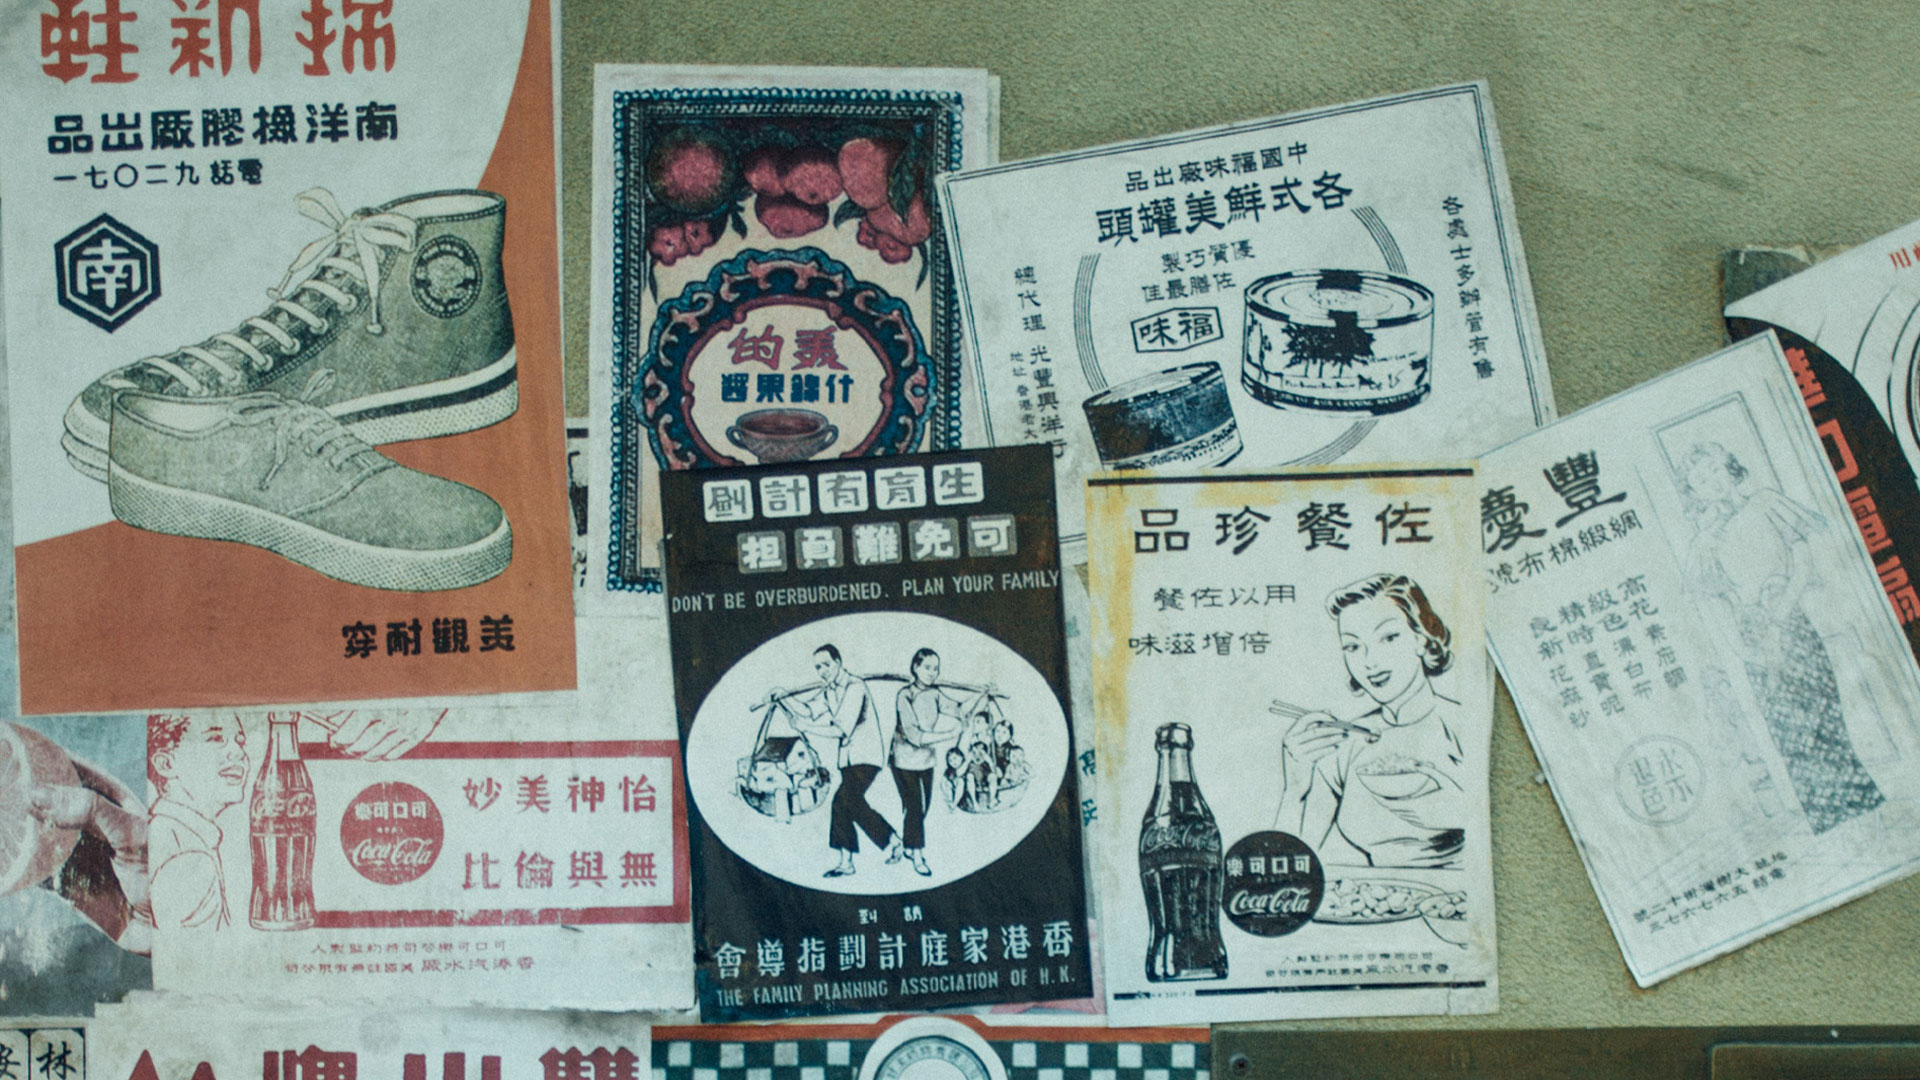 CJK fonts, image of Chinese posters.